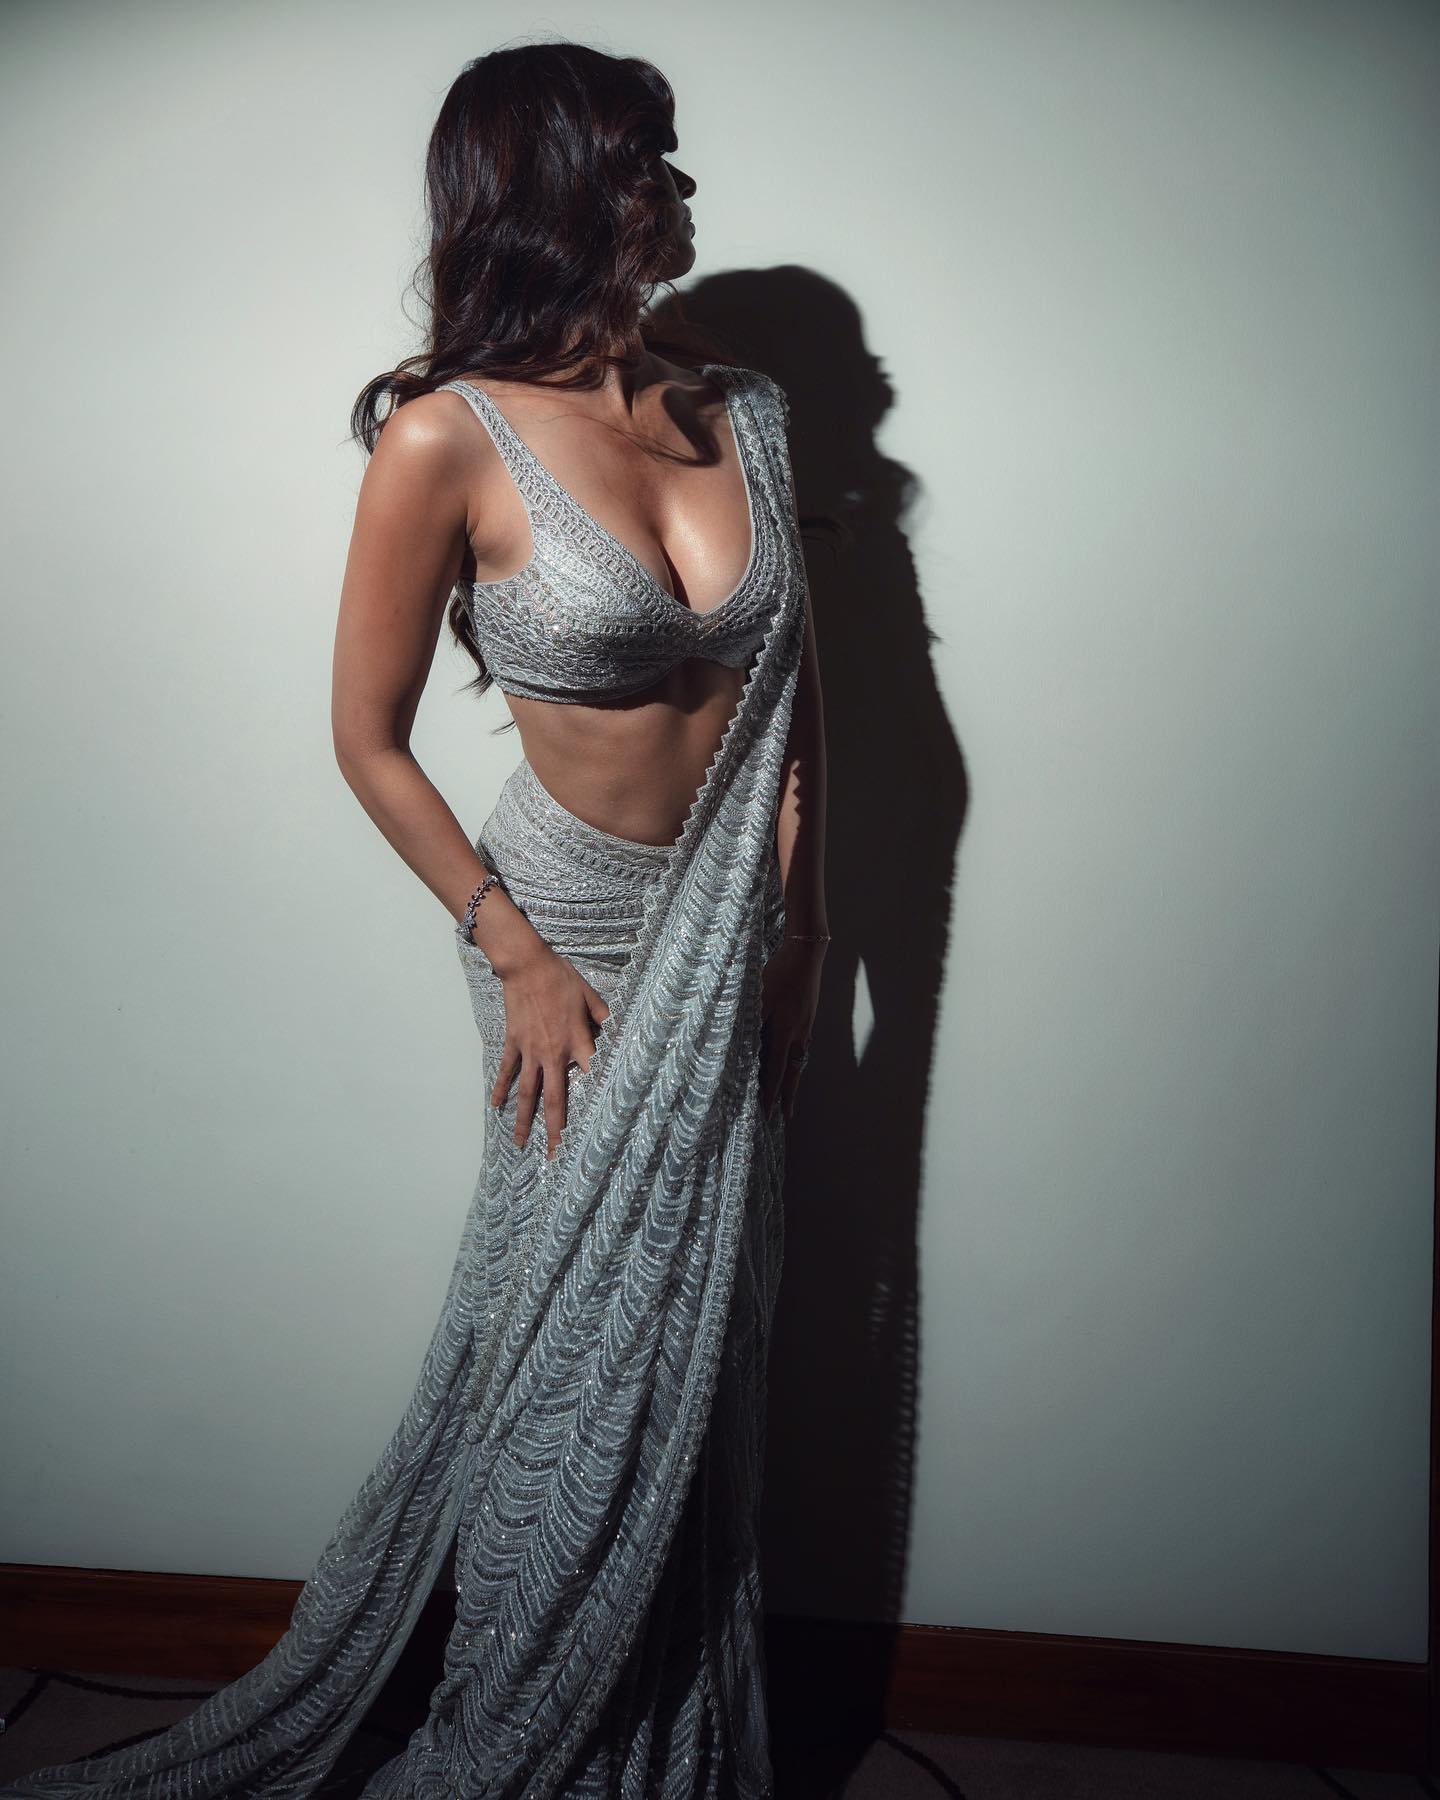 Disha Patani pairs the saree-lehenga with a deep-cut blouse that leaves little to the imagination. The actress poses with her face away from the camera, while just flaunting her toned figure